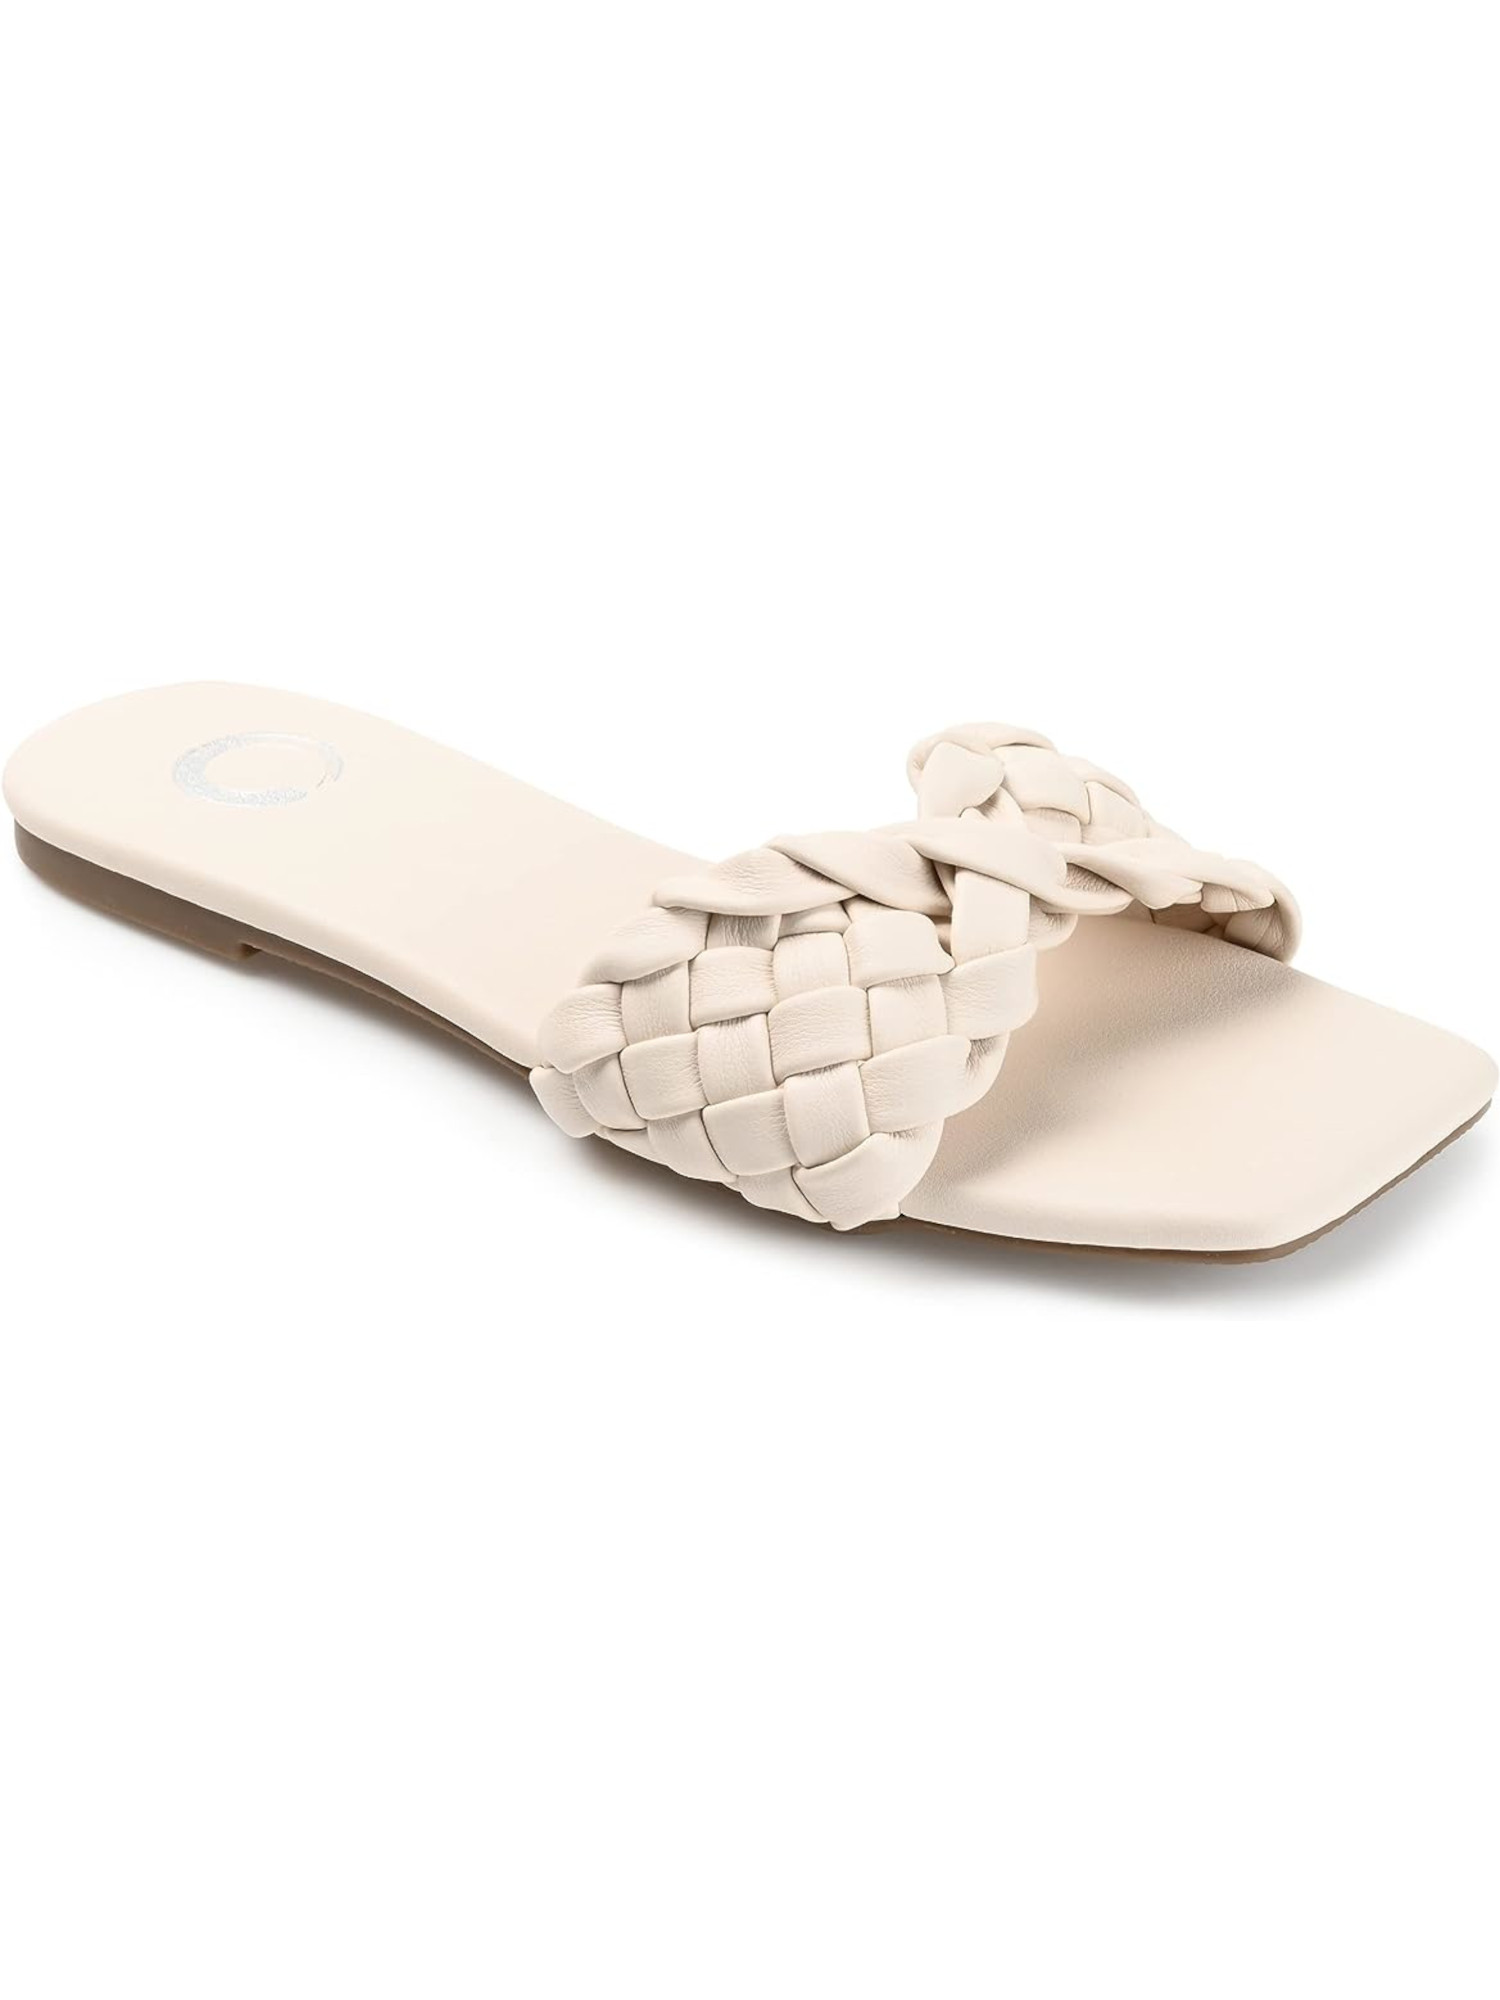 JOURNEE COLLECTION Womens Ivory Woven Comfort Tamiya Square Toe Slip On Slide Sandals Shoes 8